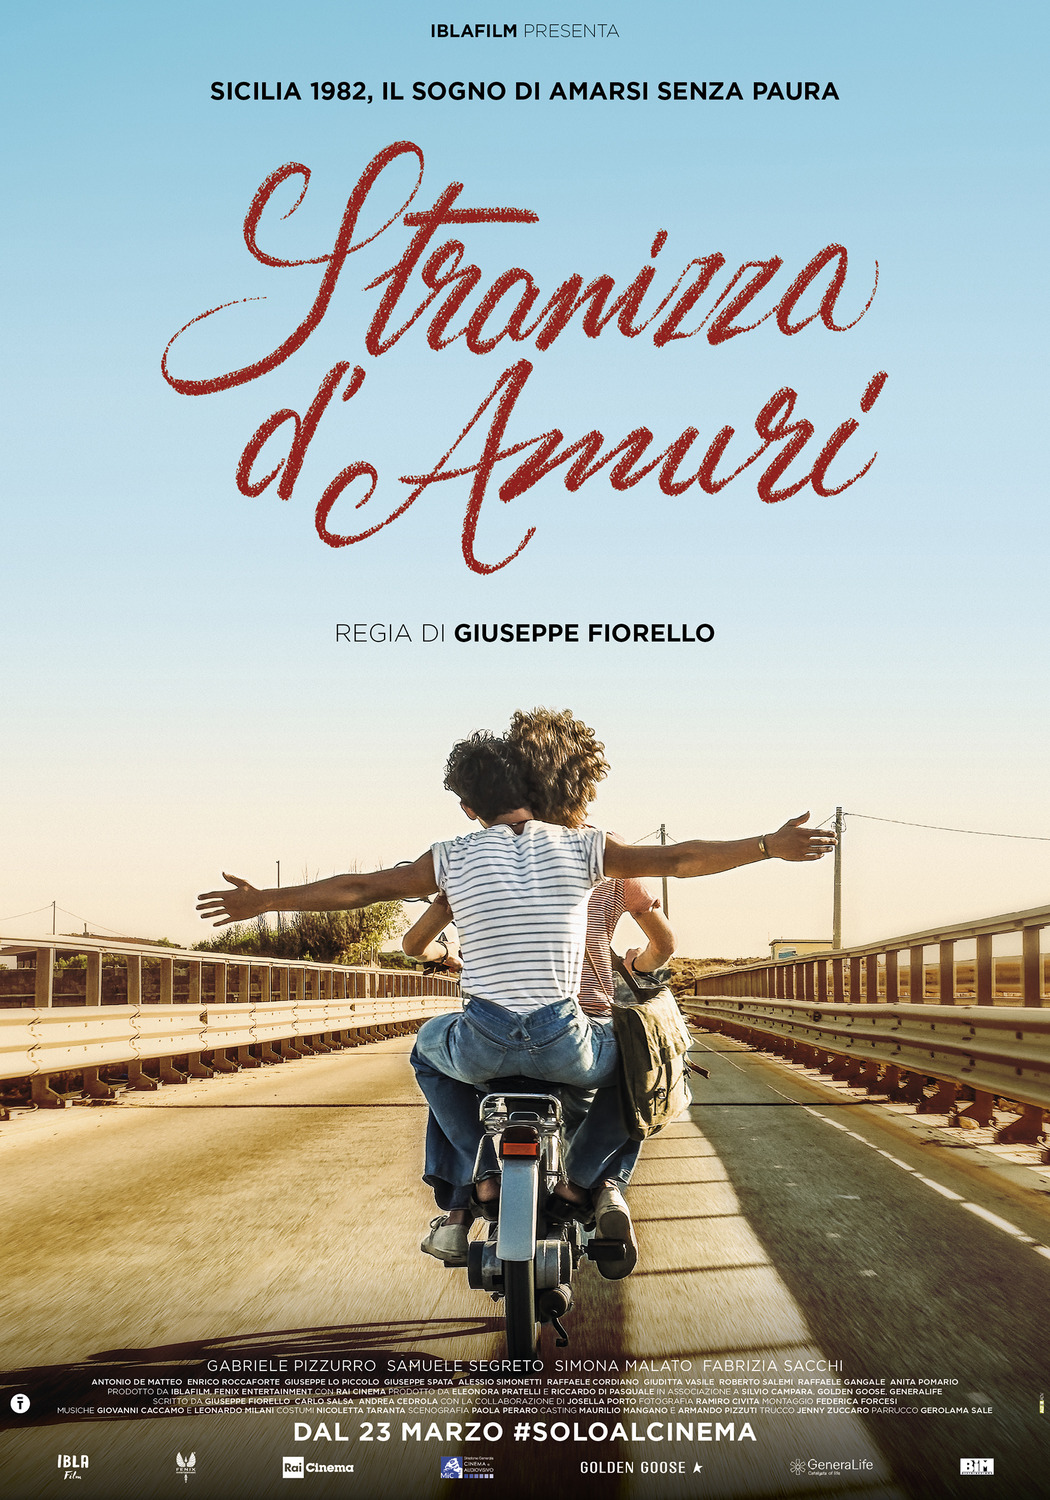 Extra Large Movie Poster Image for Stranizza d'amuri 